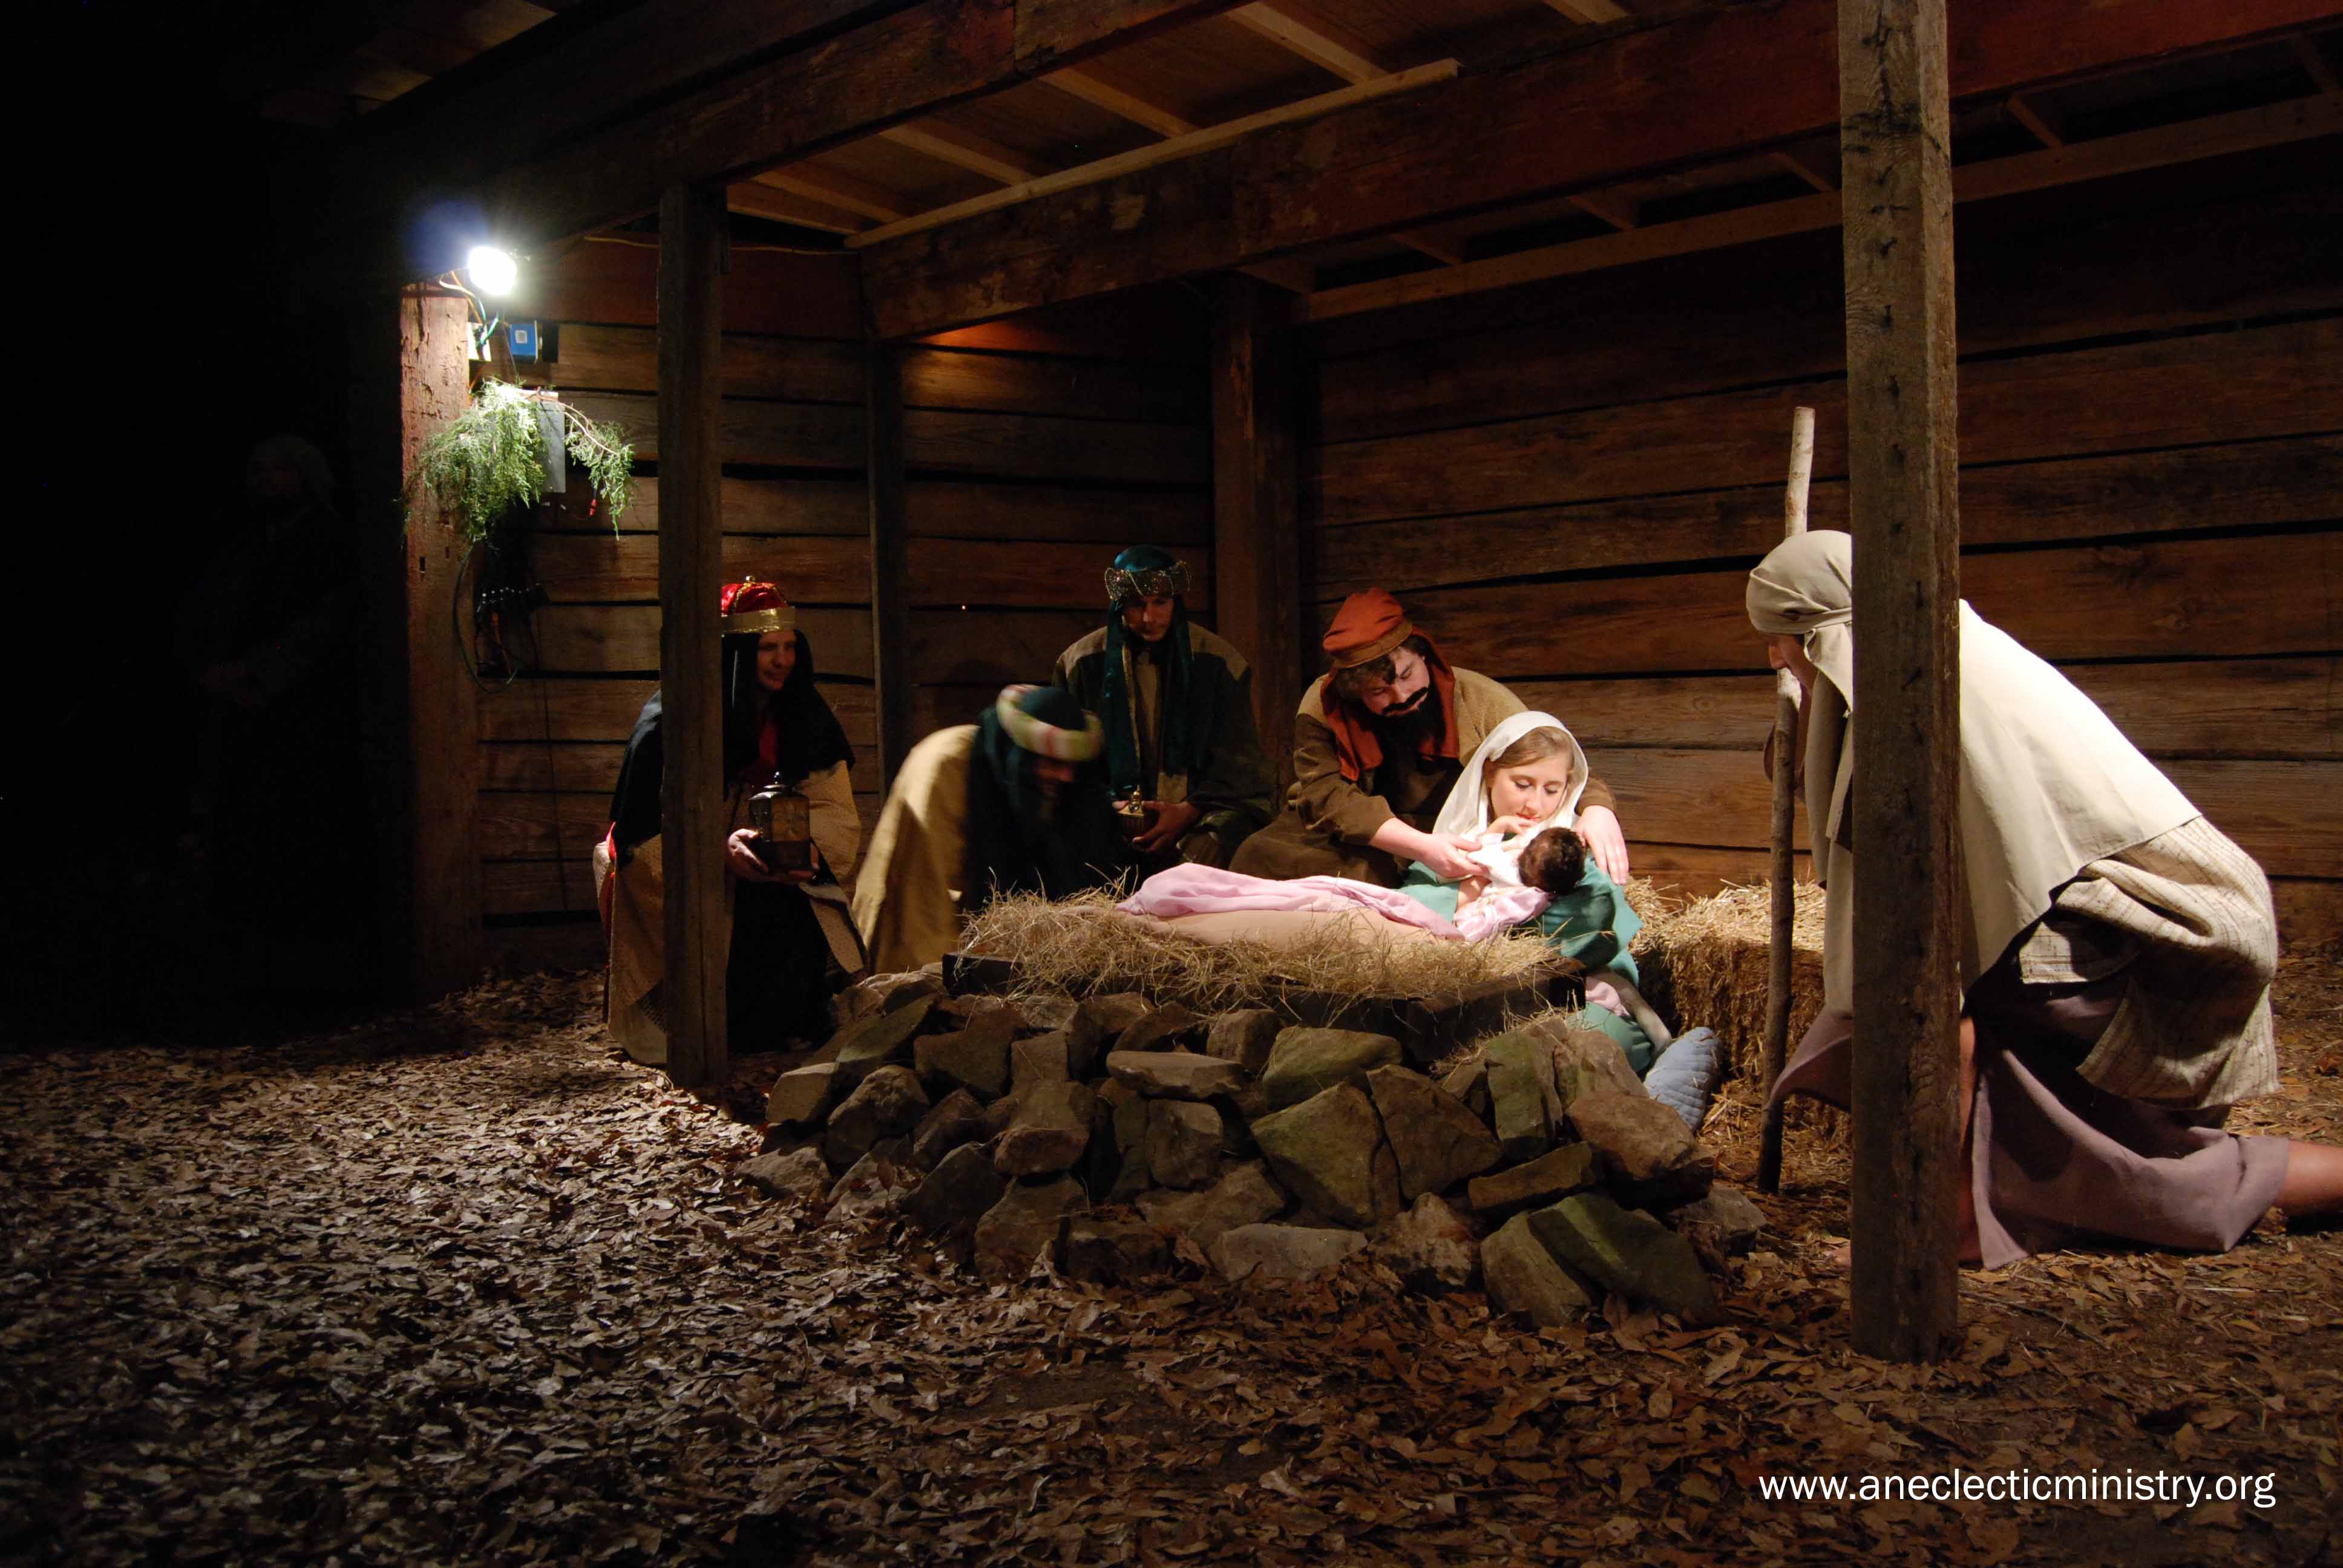 Joseph, Mary, and Jesus in the manger with shepherds